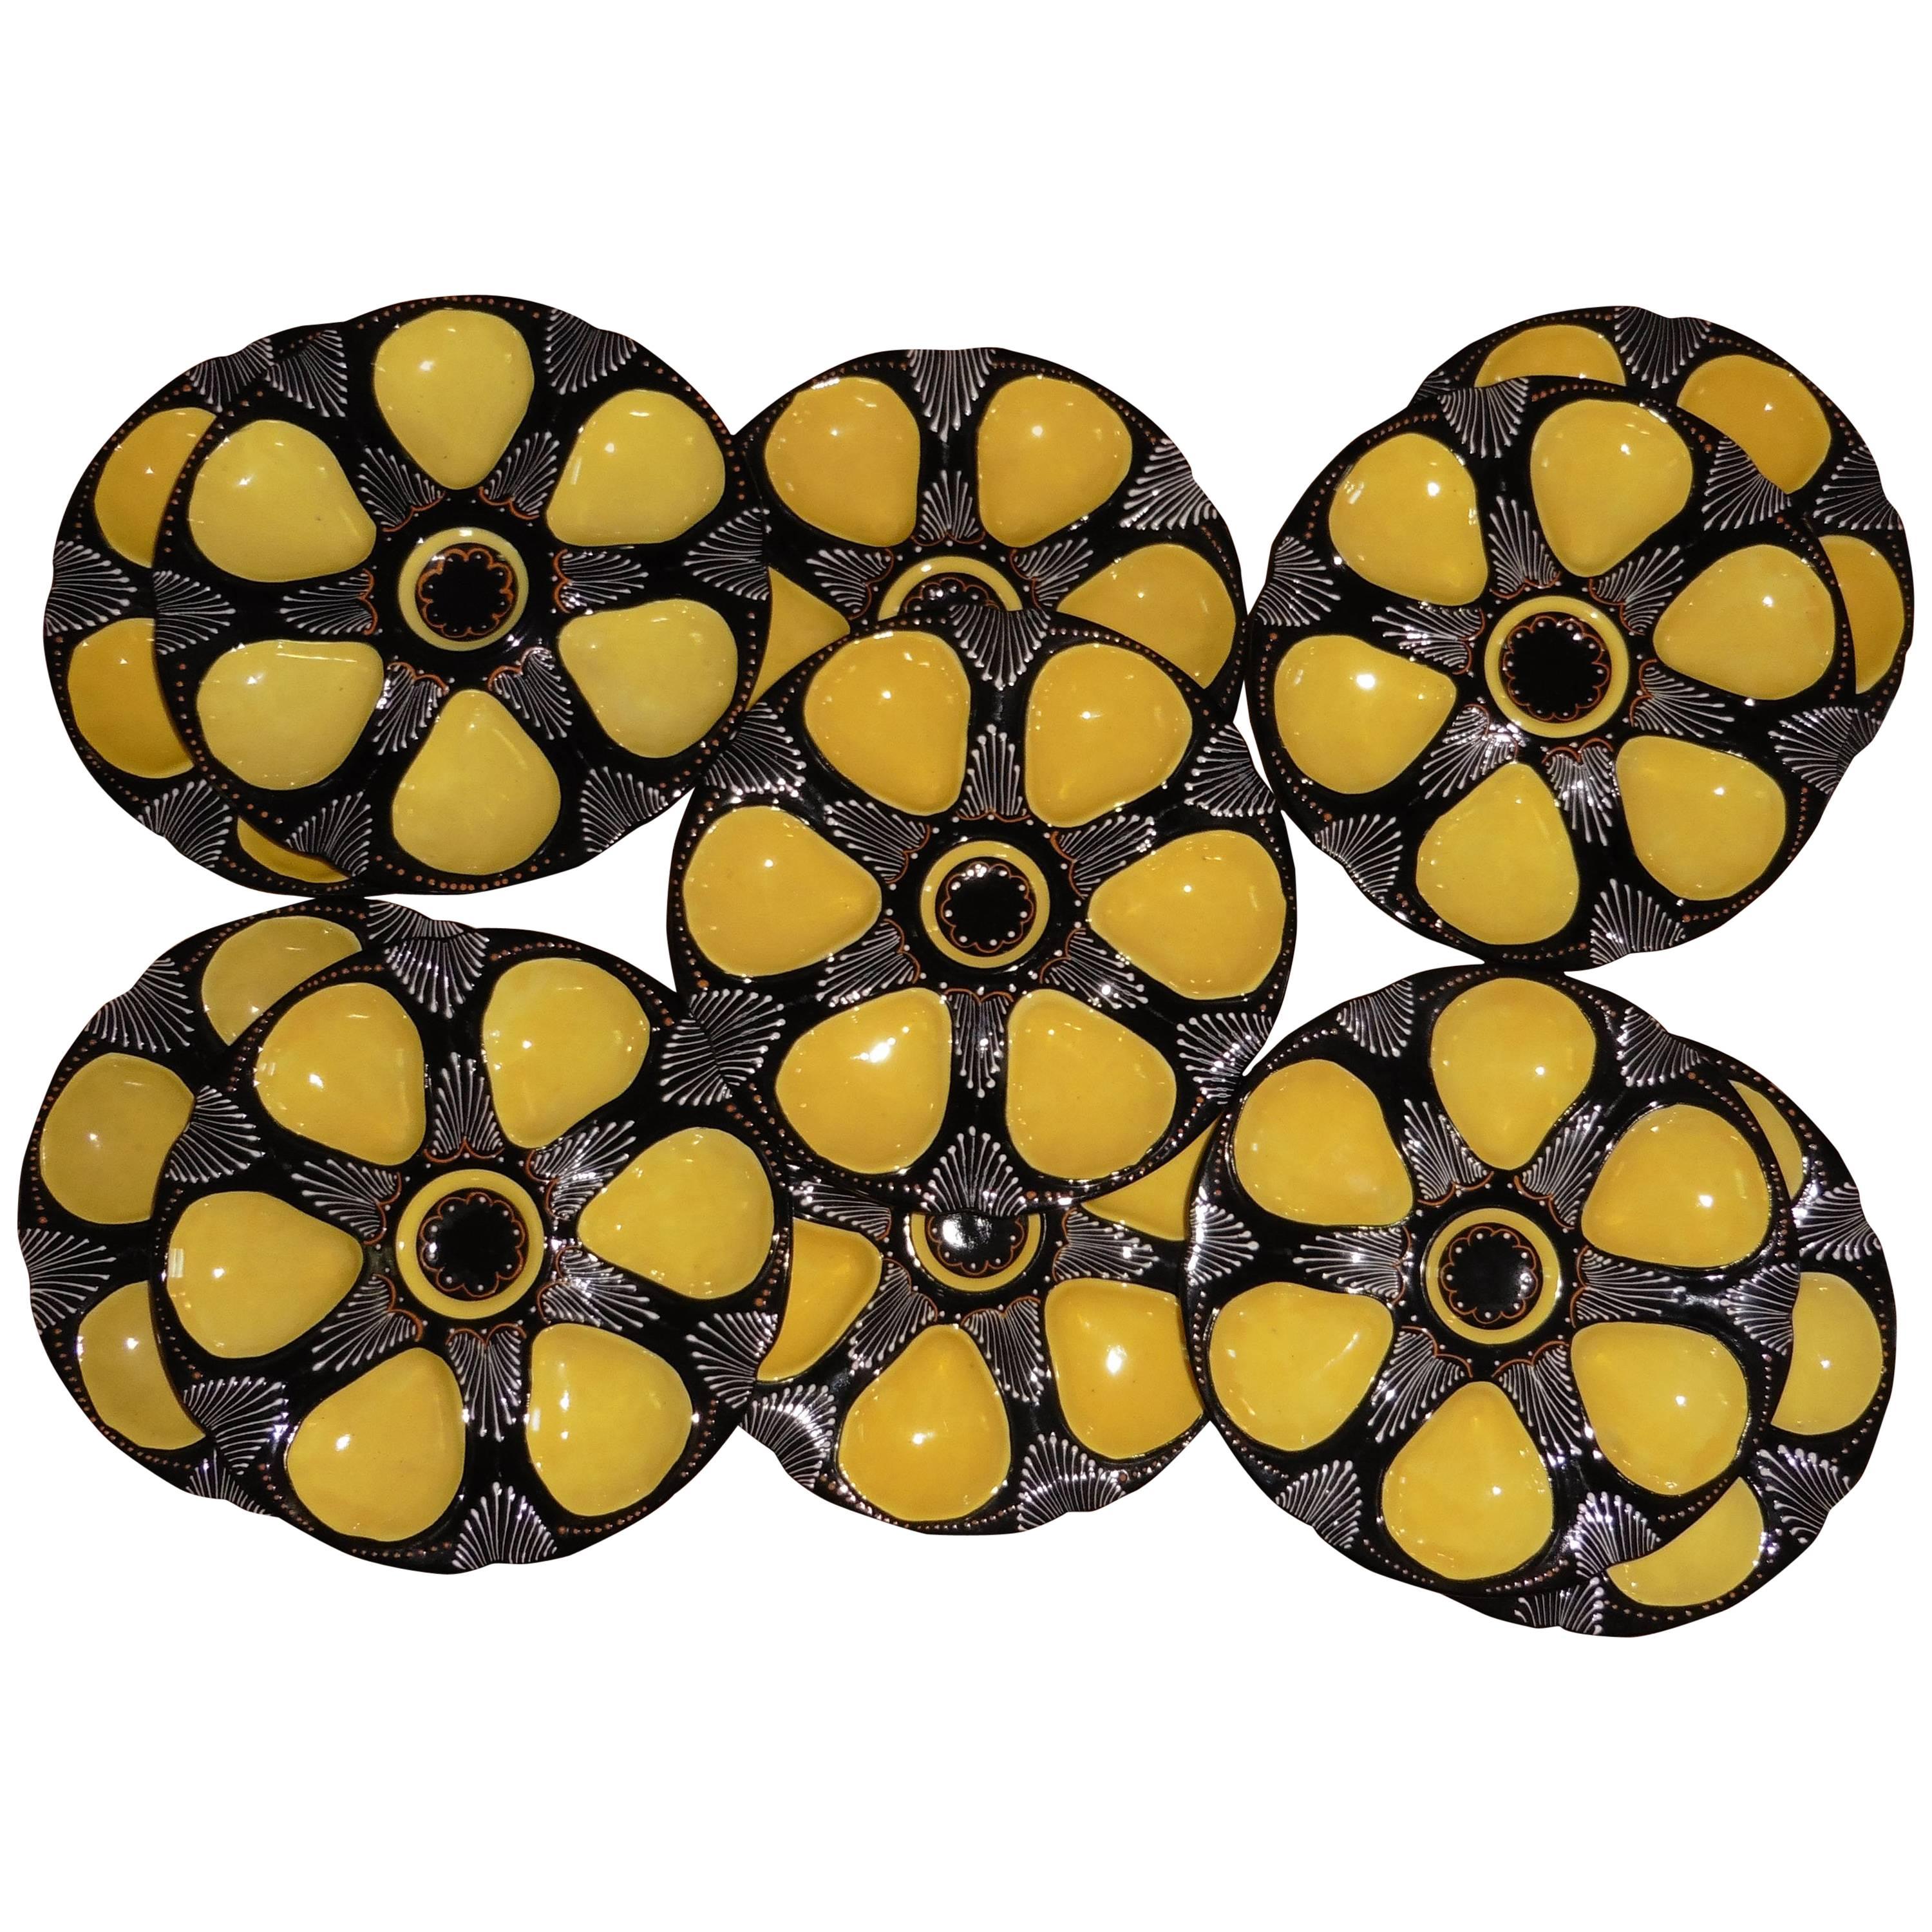 French faience black and yellow oyster plate signed Quimper, circa 1940.
